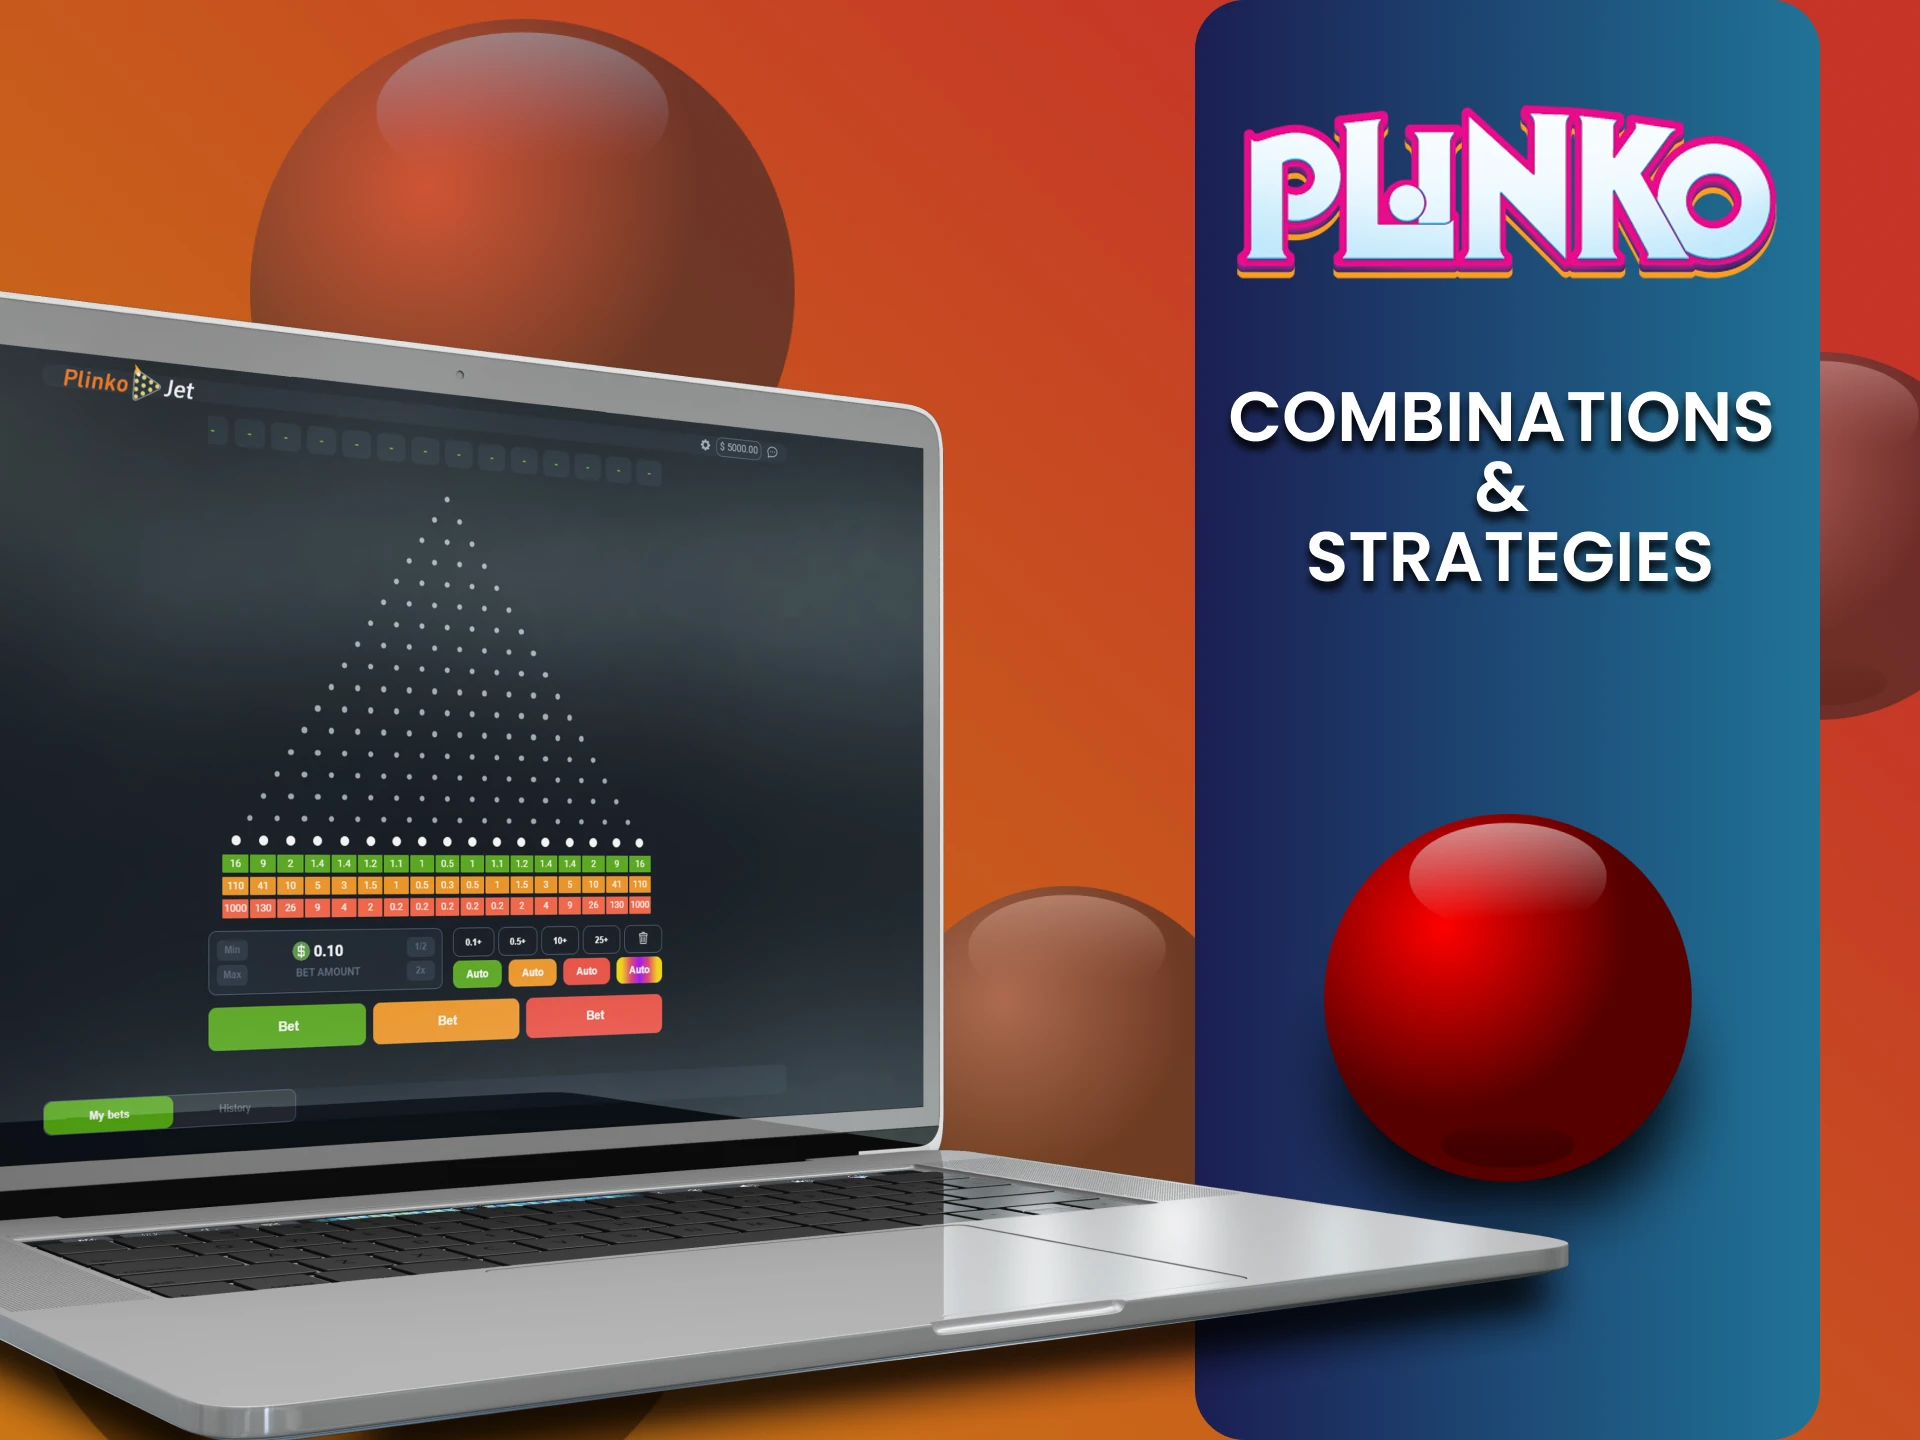 Try different tactics and strategies in the Plinko game.